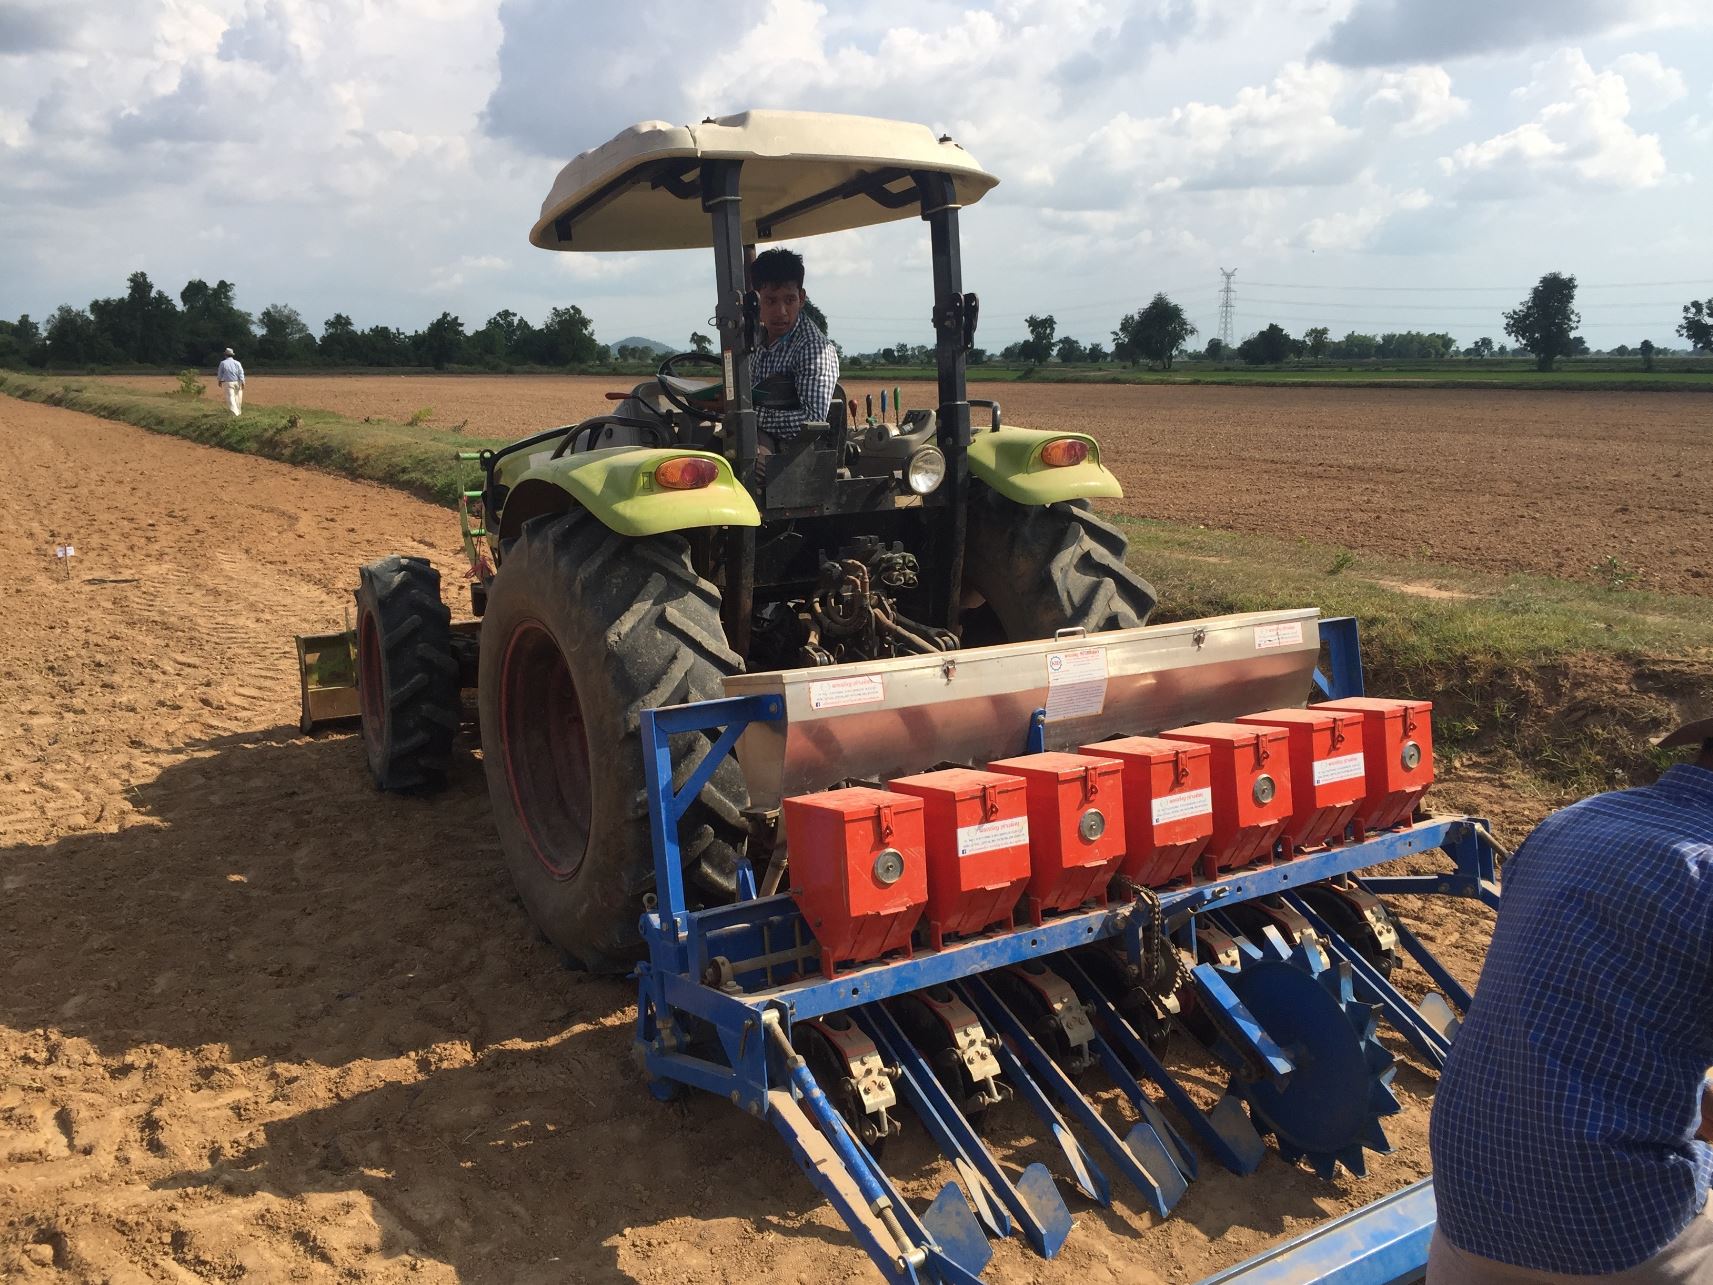 KID seeder being trialled at Mr Wantha’s farm at Svay Cheat Village, Battambang Province for early wet season dry seeding. Photographer: Bob Martin